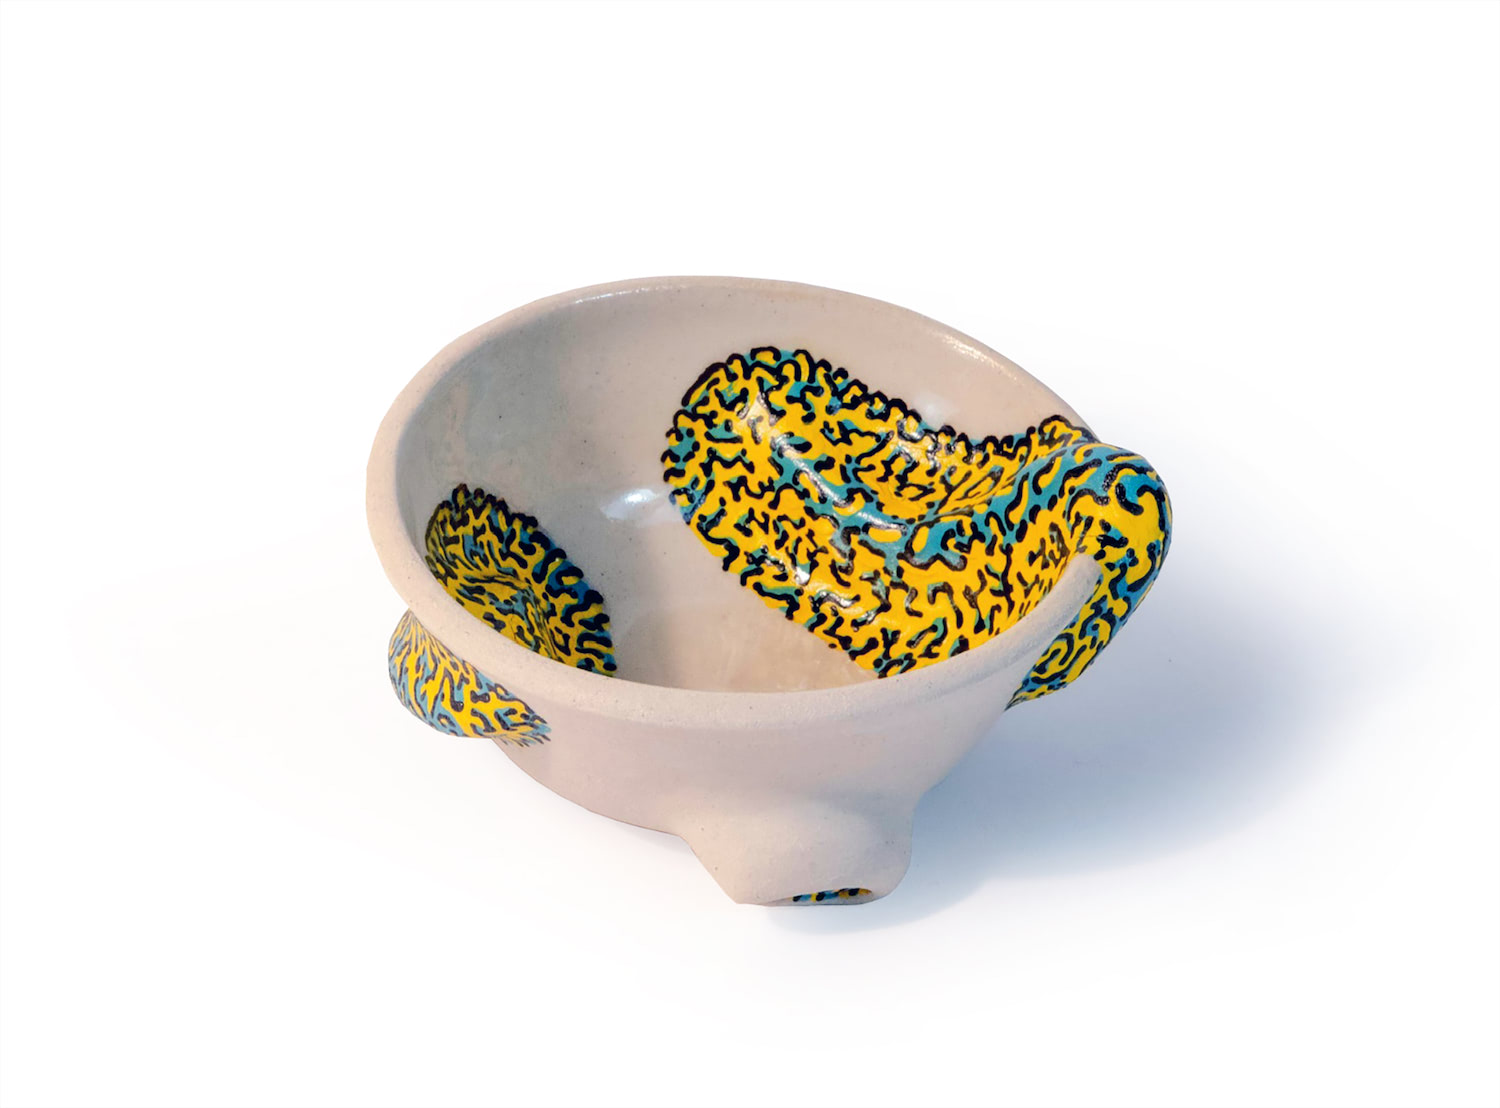 An image of a white bowl form with a blue, yellow, and black line pattern that covers sculptural surface additions that move from the exterior to the interior.